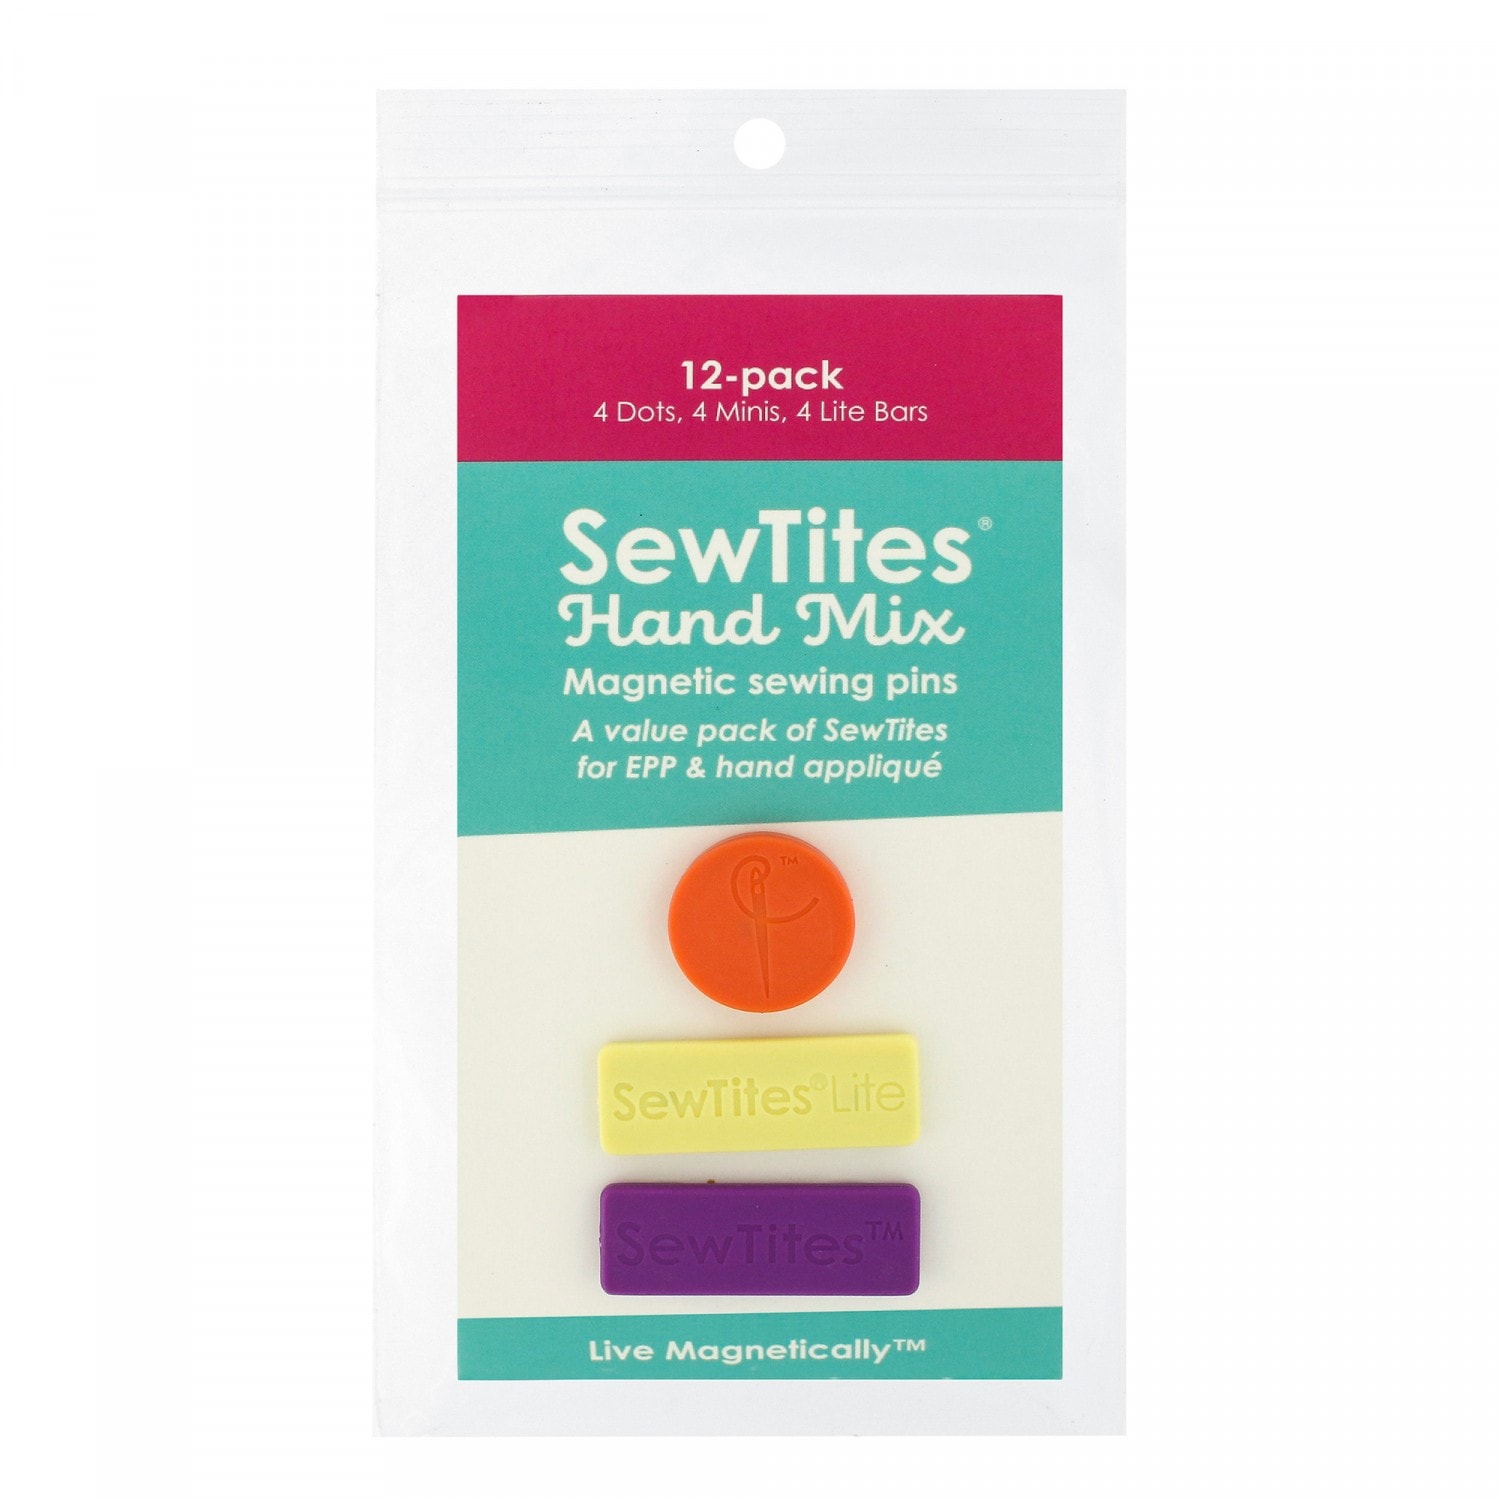 SewTites Hand Mix Magnetic Sewing Pins